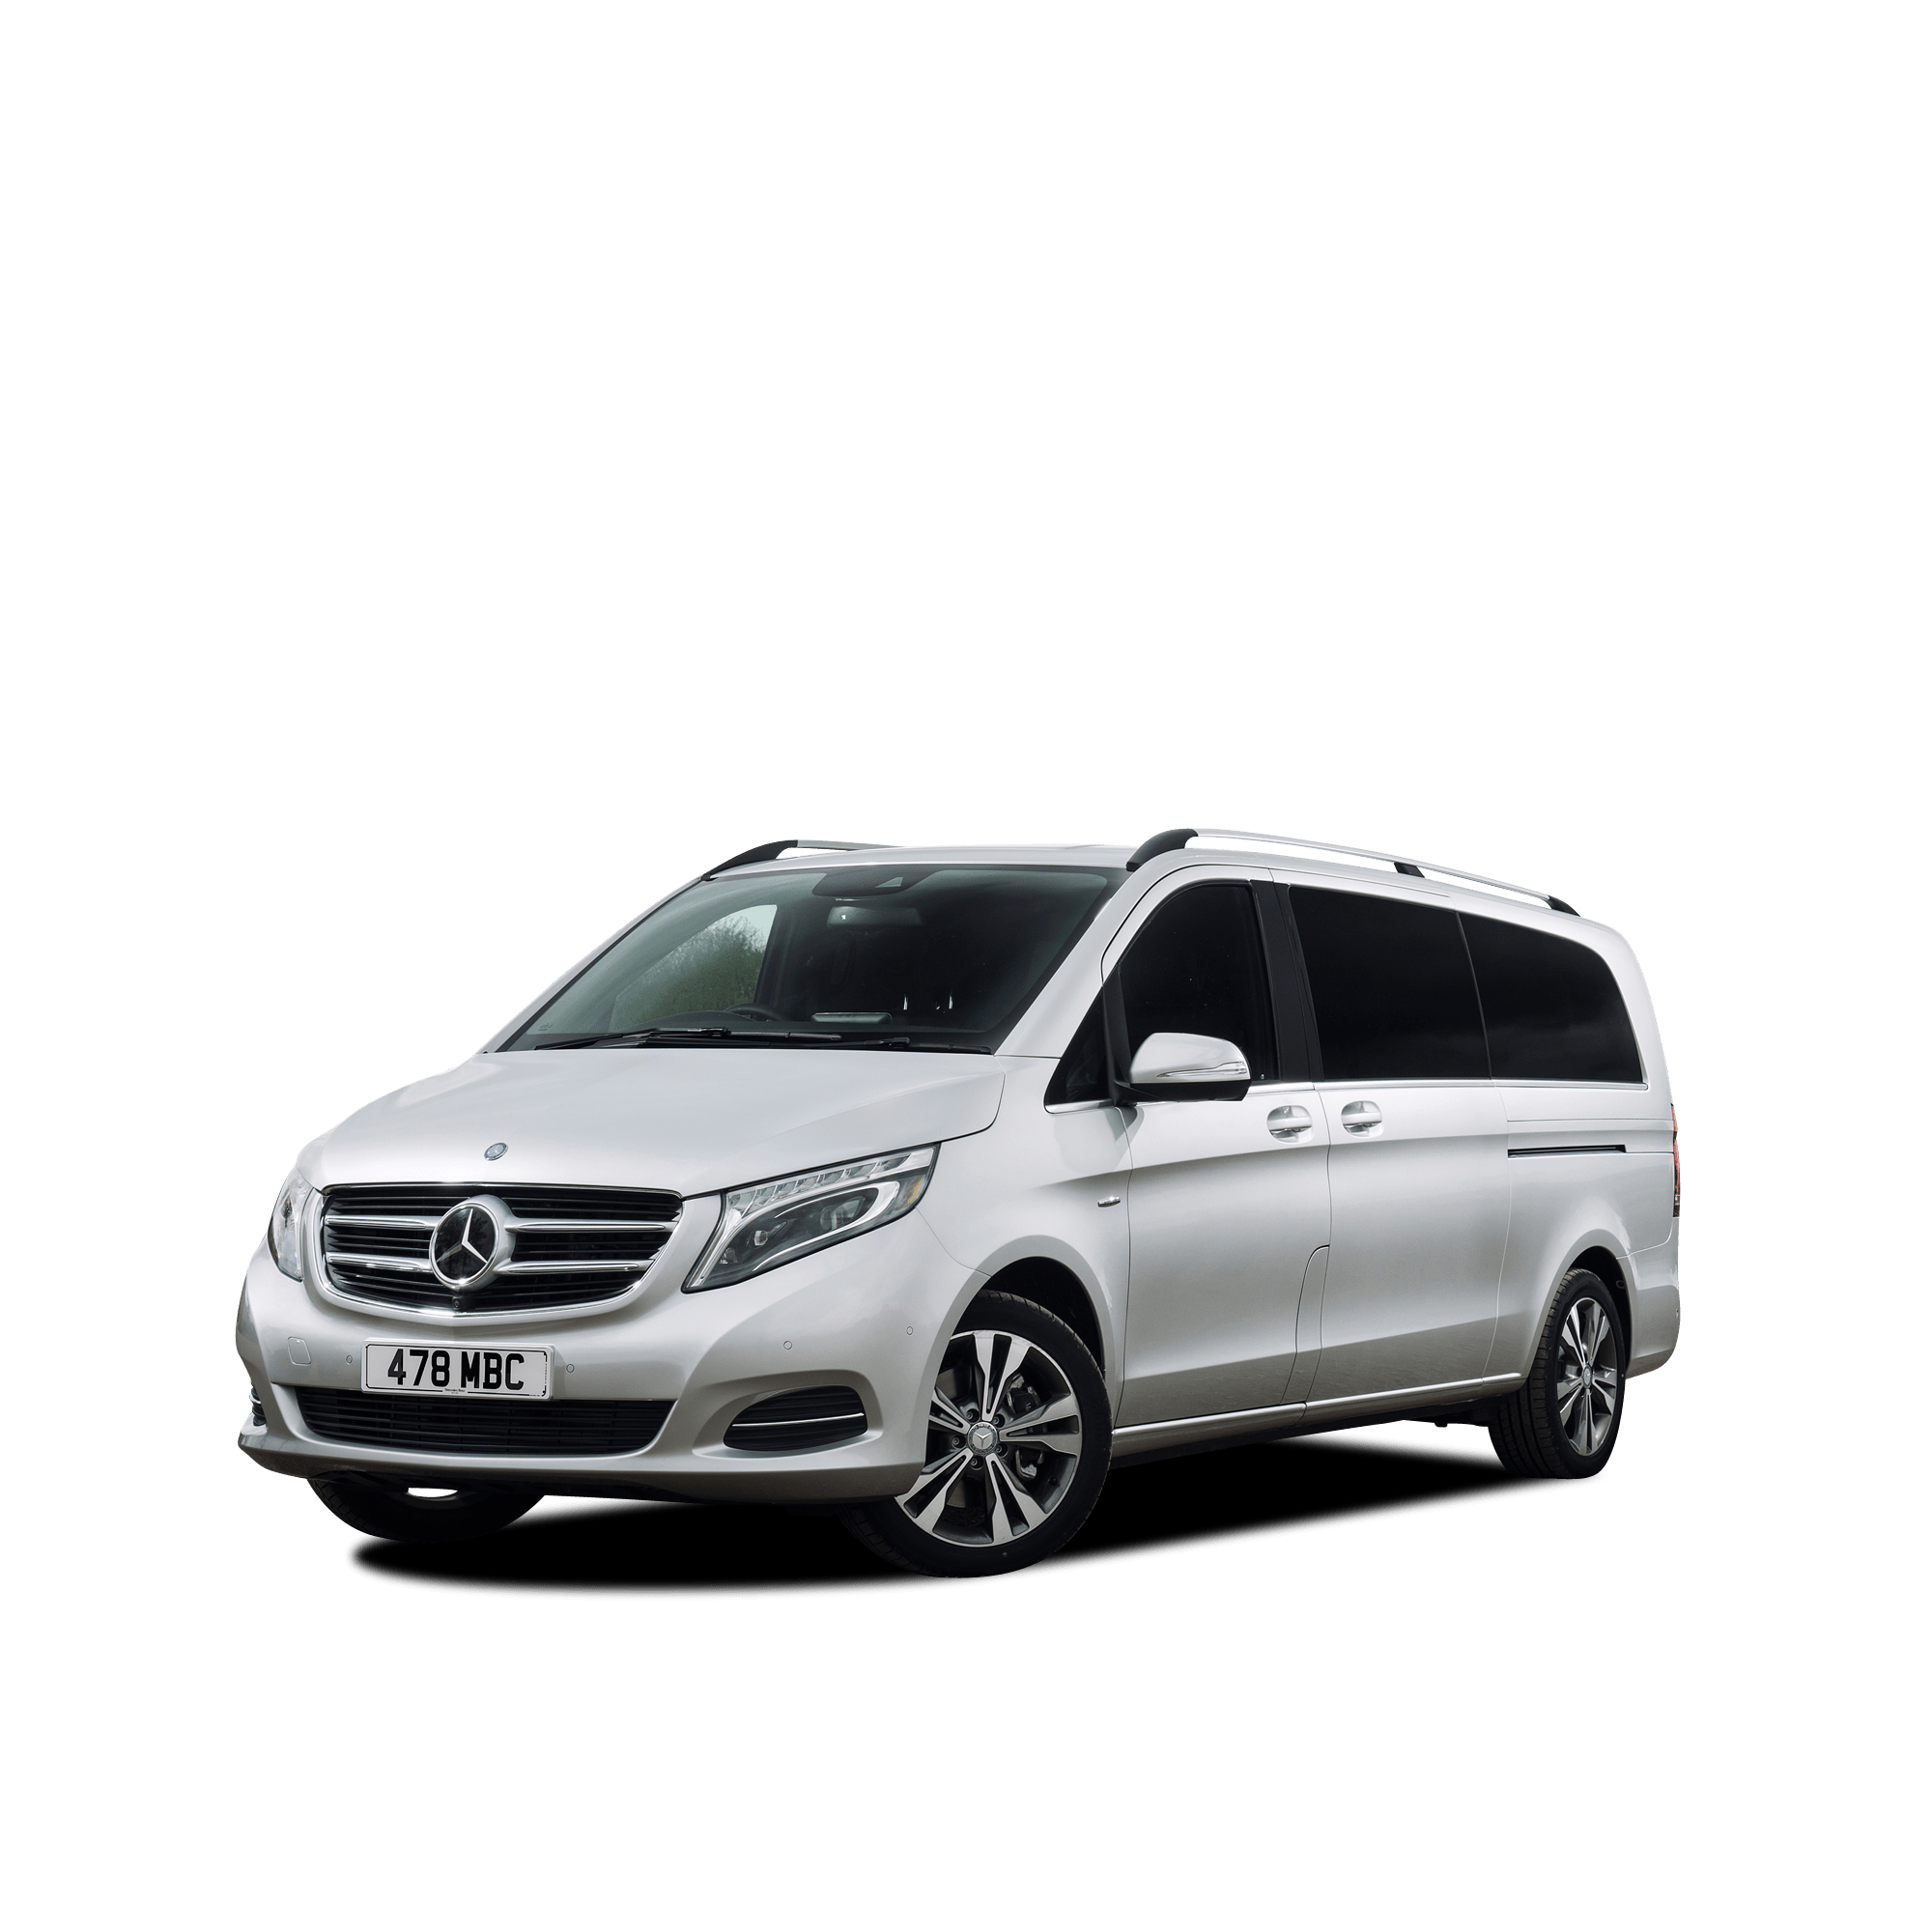 test it! The Mercedes Viano